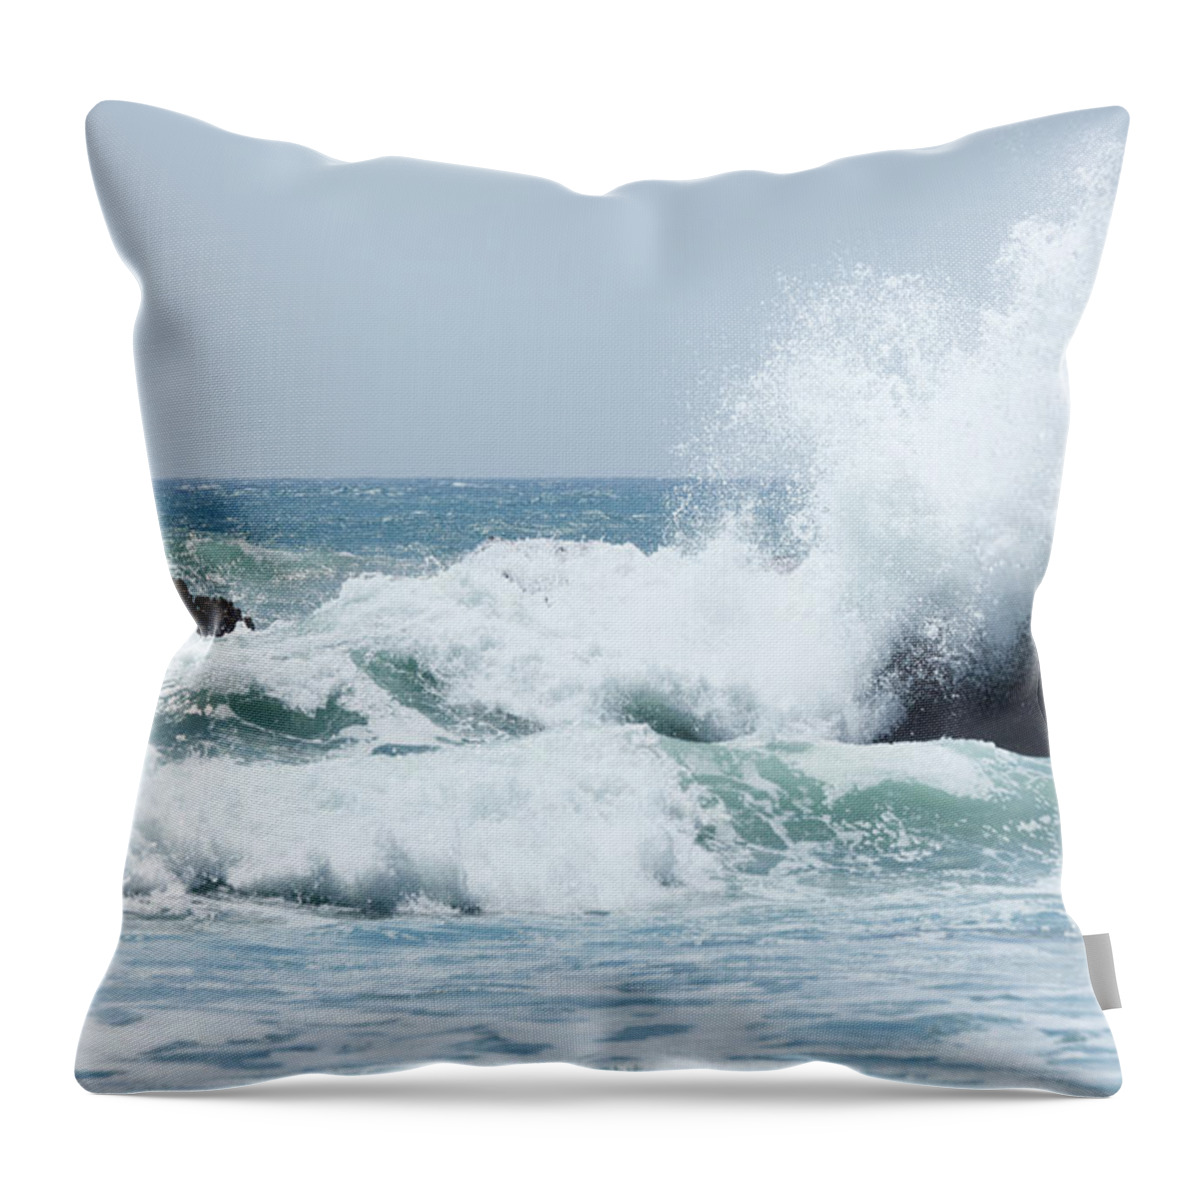 Water's Edge Throw Pillow featuring the photograph Ocean Wave Smashing Aginst Black by Arturbo